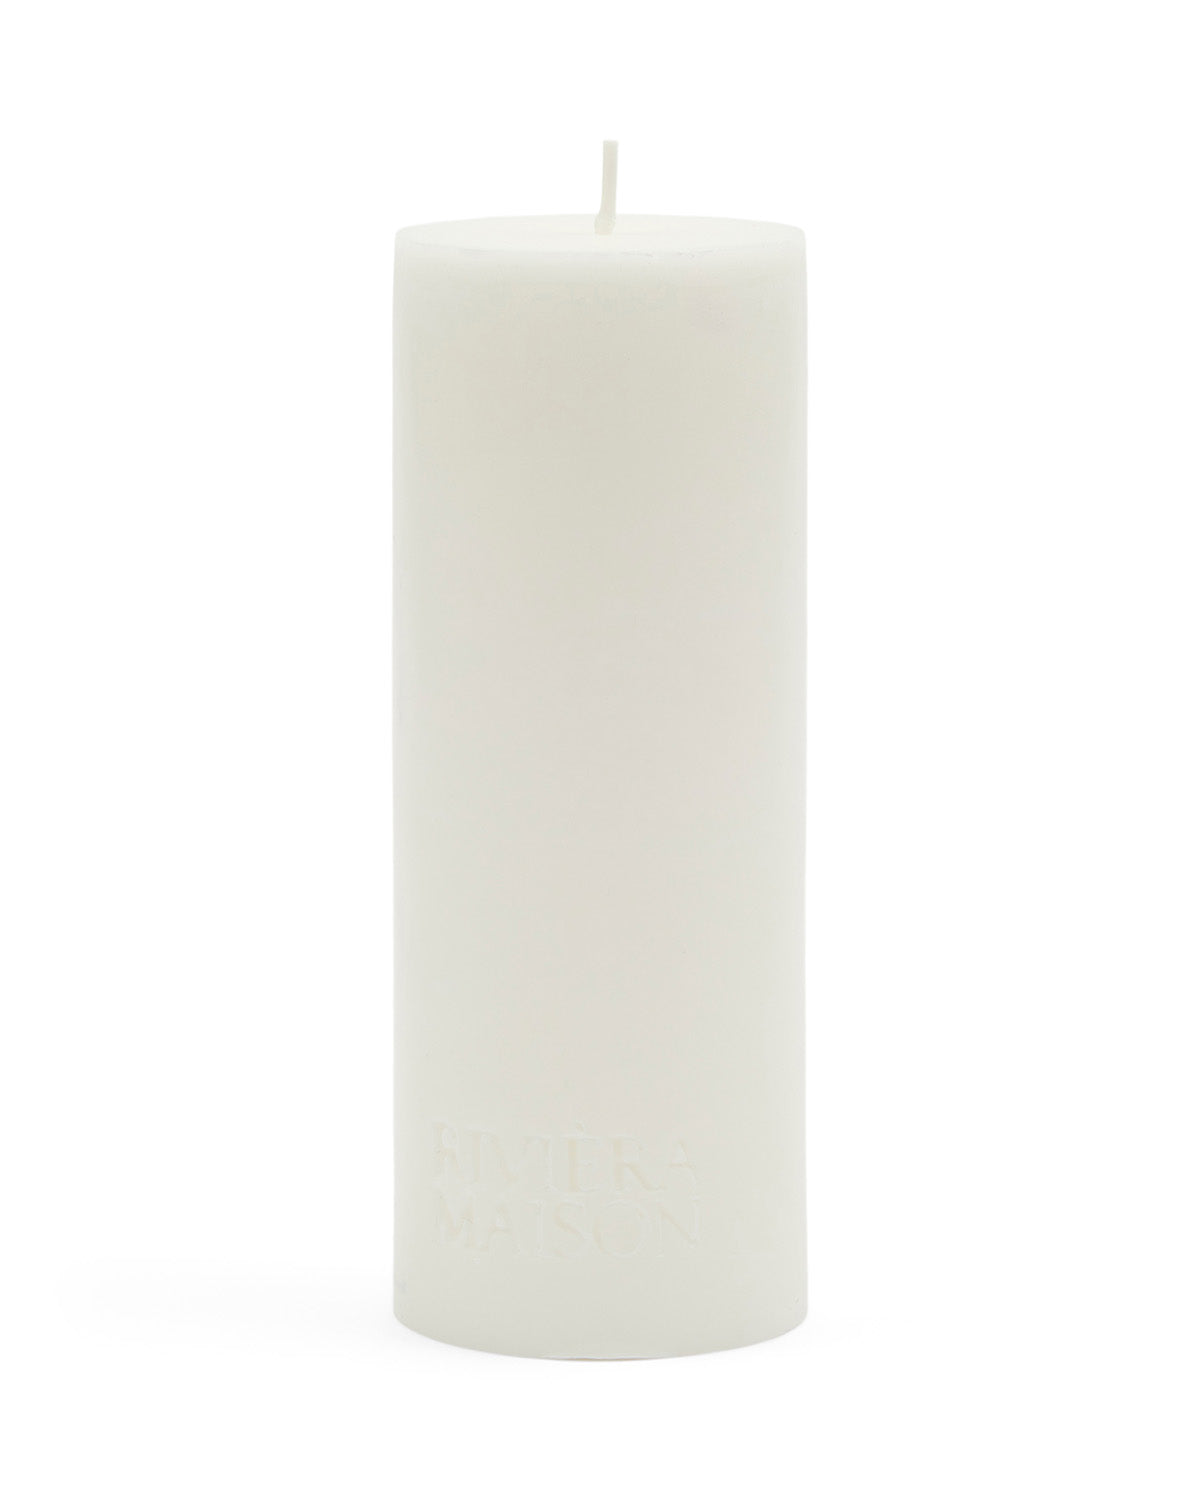 CANDLE WHITE by Riviera Maison